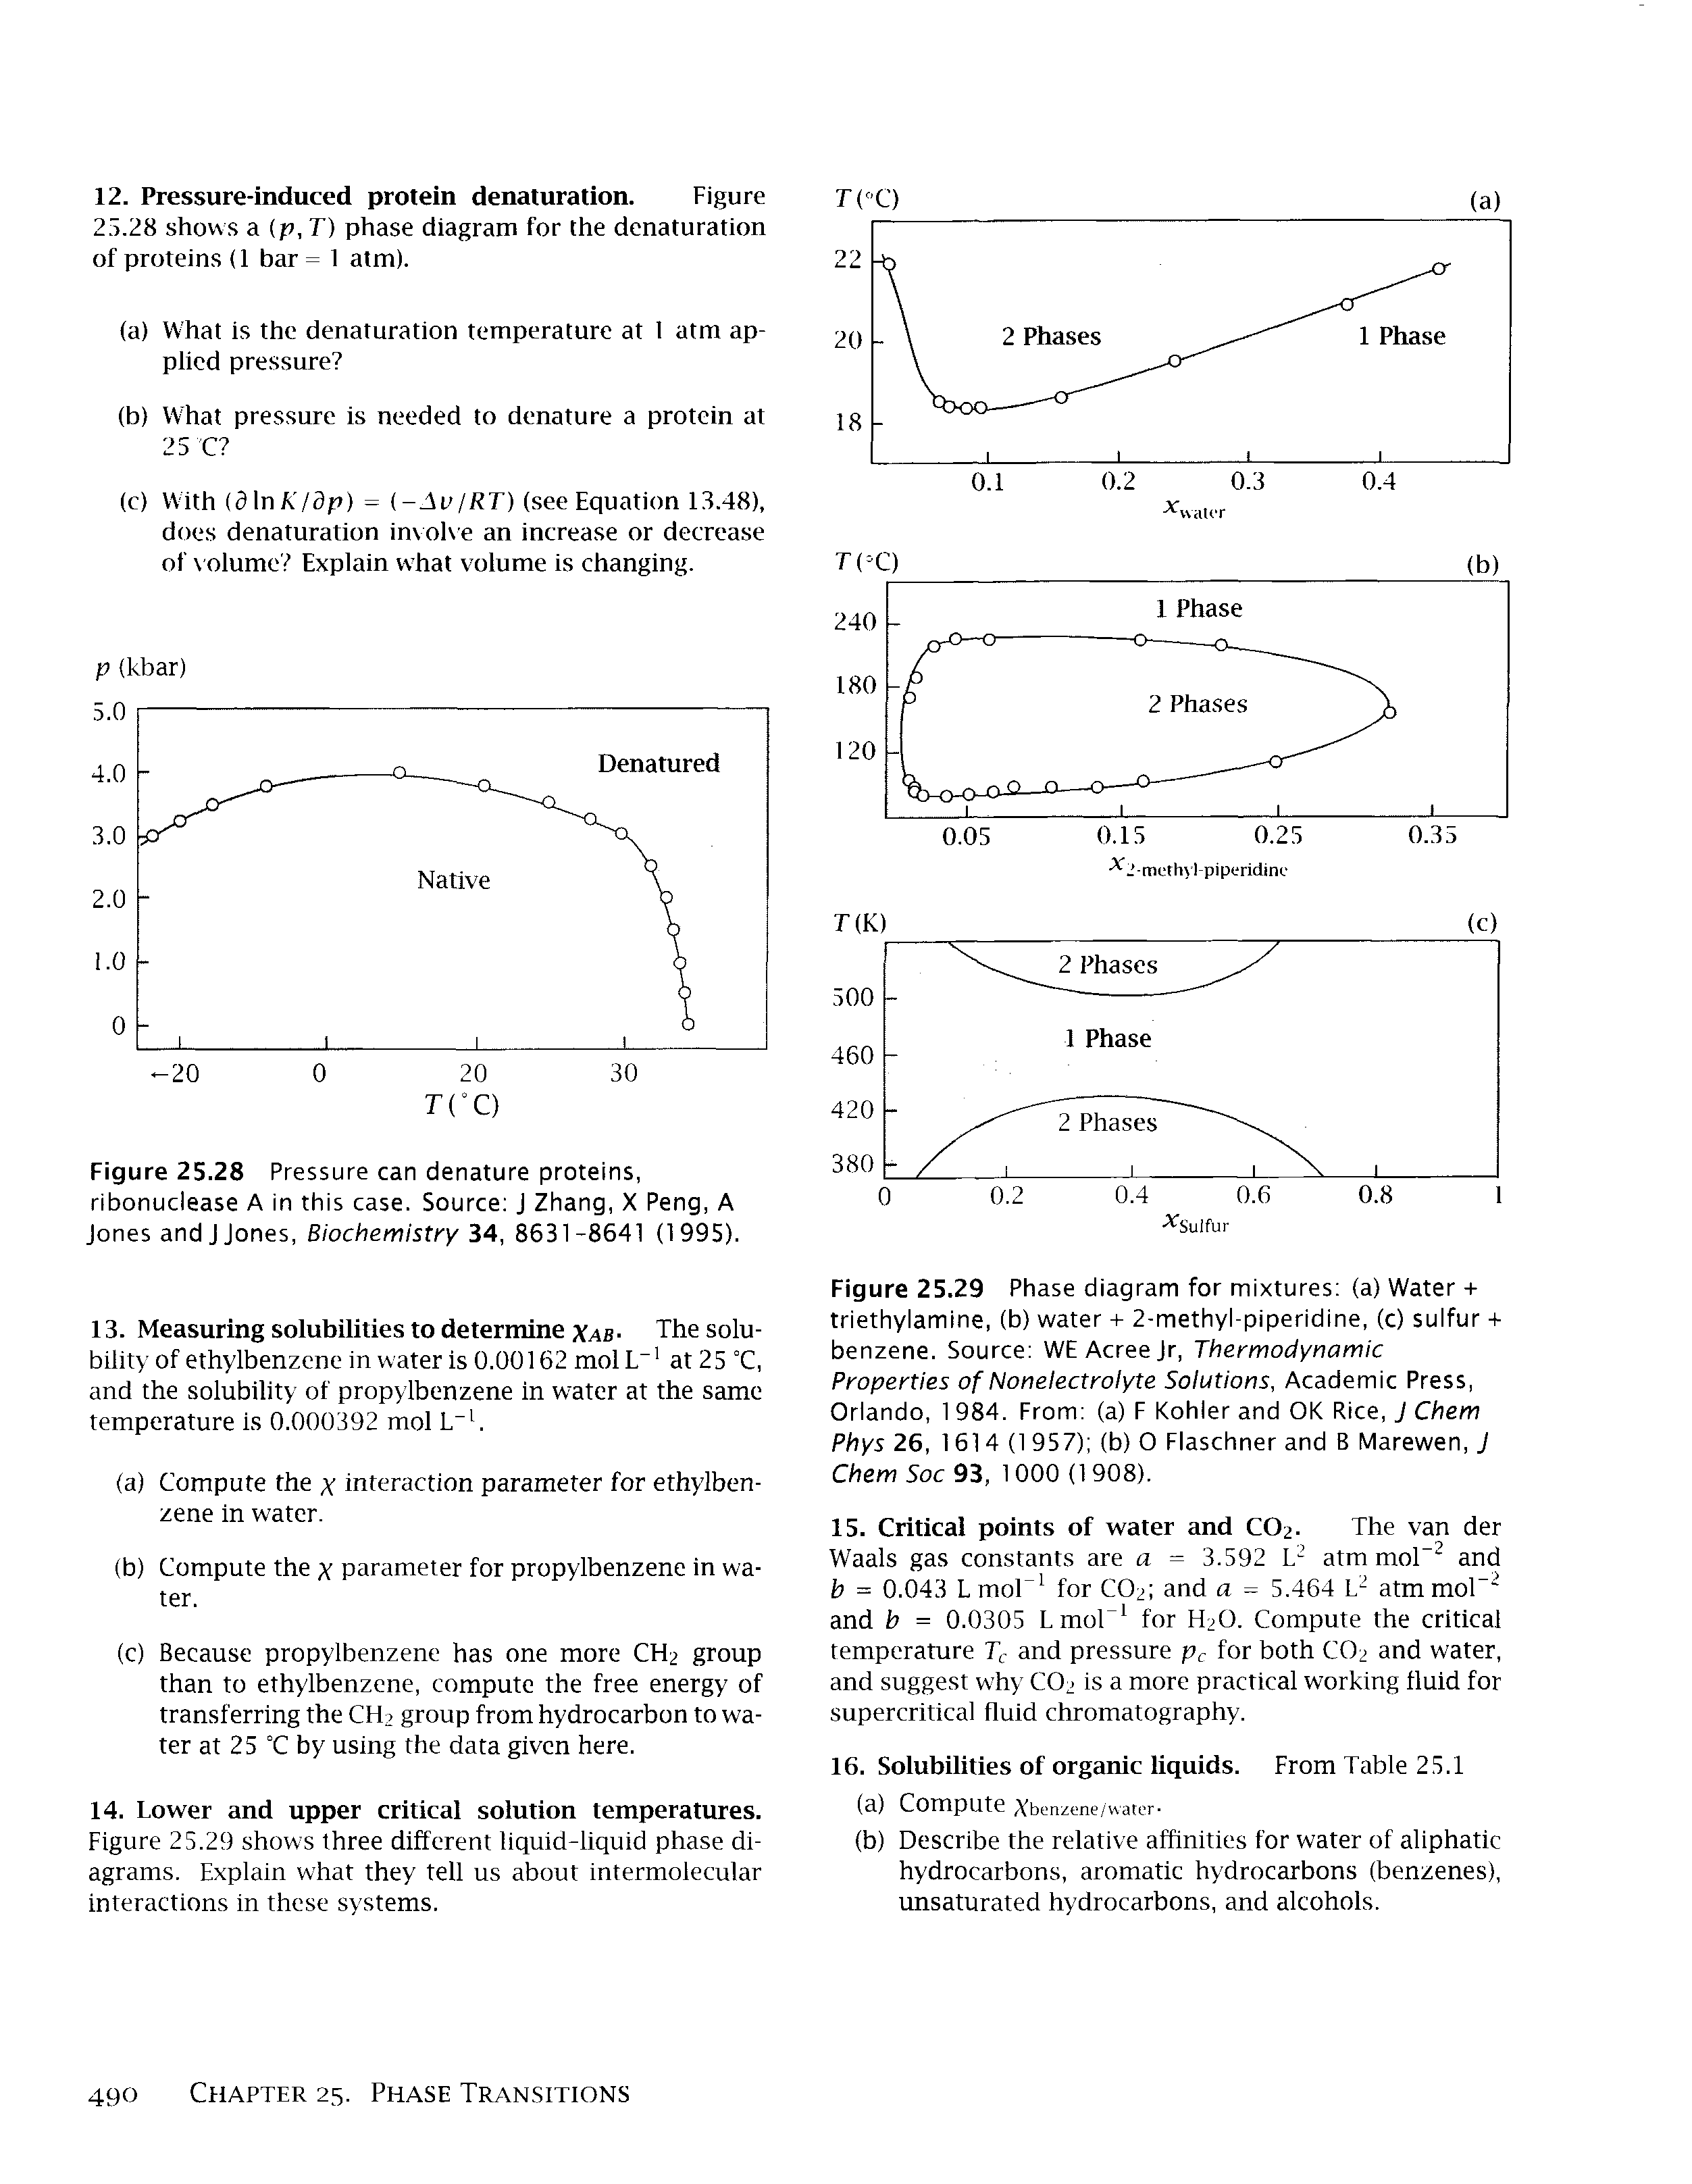 Figure 25.29 Phase diagram for mixtures (a) Water -1-triethylamine, (b) water -1- 2-methyl-piperidine, (c) sulfur + benzene. Source WE Acree Jr, Thermodynamic Properties of Nonelectrolyte Solutions, Academic Press, Orlando, 1 984. From (a) F Kohler and OK Rice, J Chem Phys 26, 1614 (1 957) (b) O Flaschner and B Marewen, J Chem Soc 93, 1000 (1908).